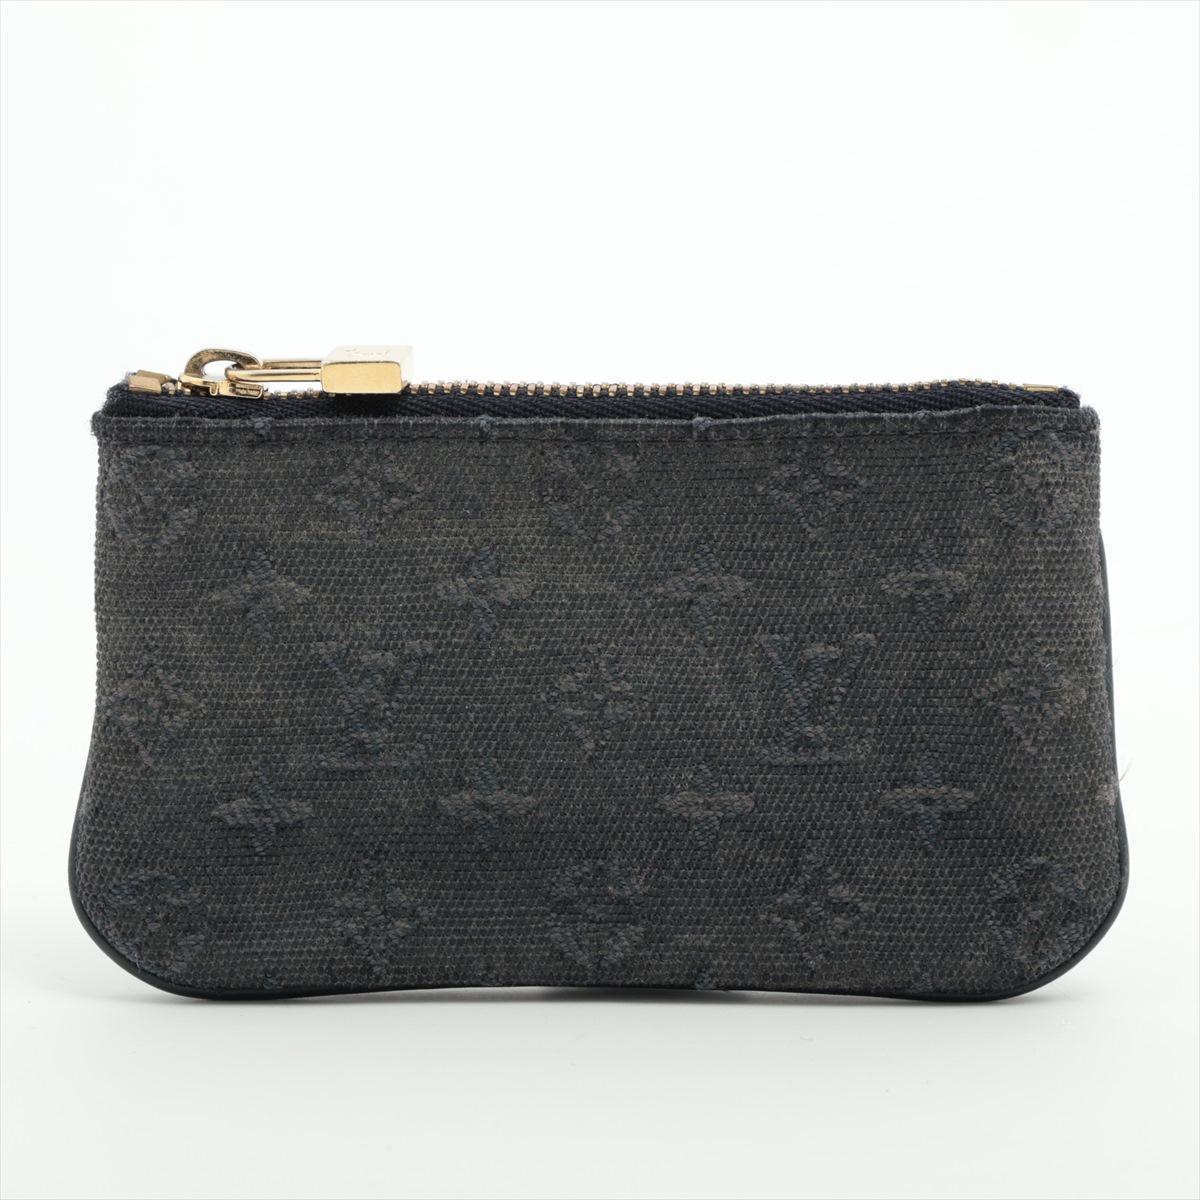 The Louis Vuitton Monogram Denim Coin Purse in Black is a sleek and practical accessory designed for everyday use. Crafted from durable denim fabric with the iconic Louis Vuitton Monogram pattern, the coin purse exudes sophistication and style. Its